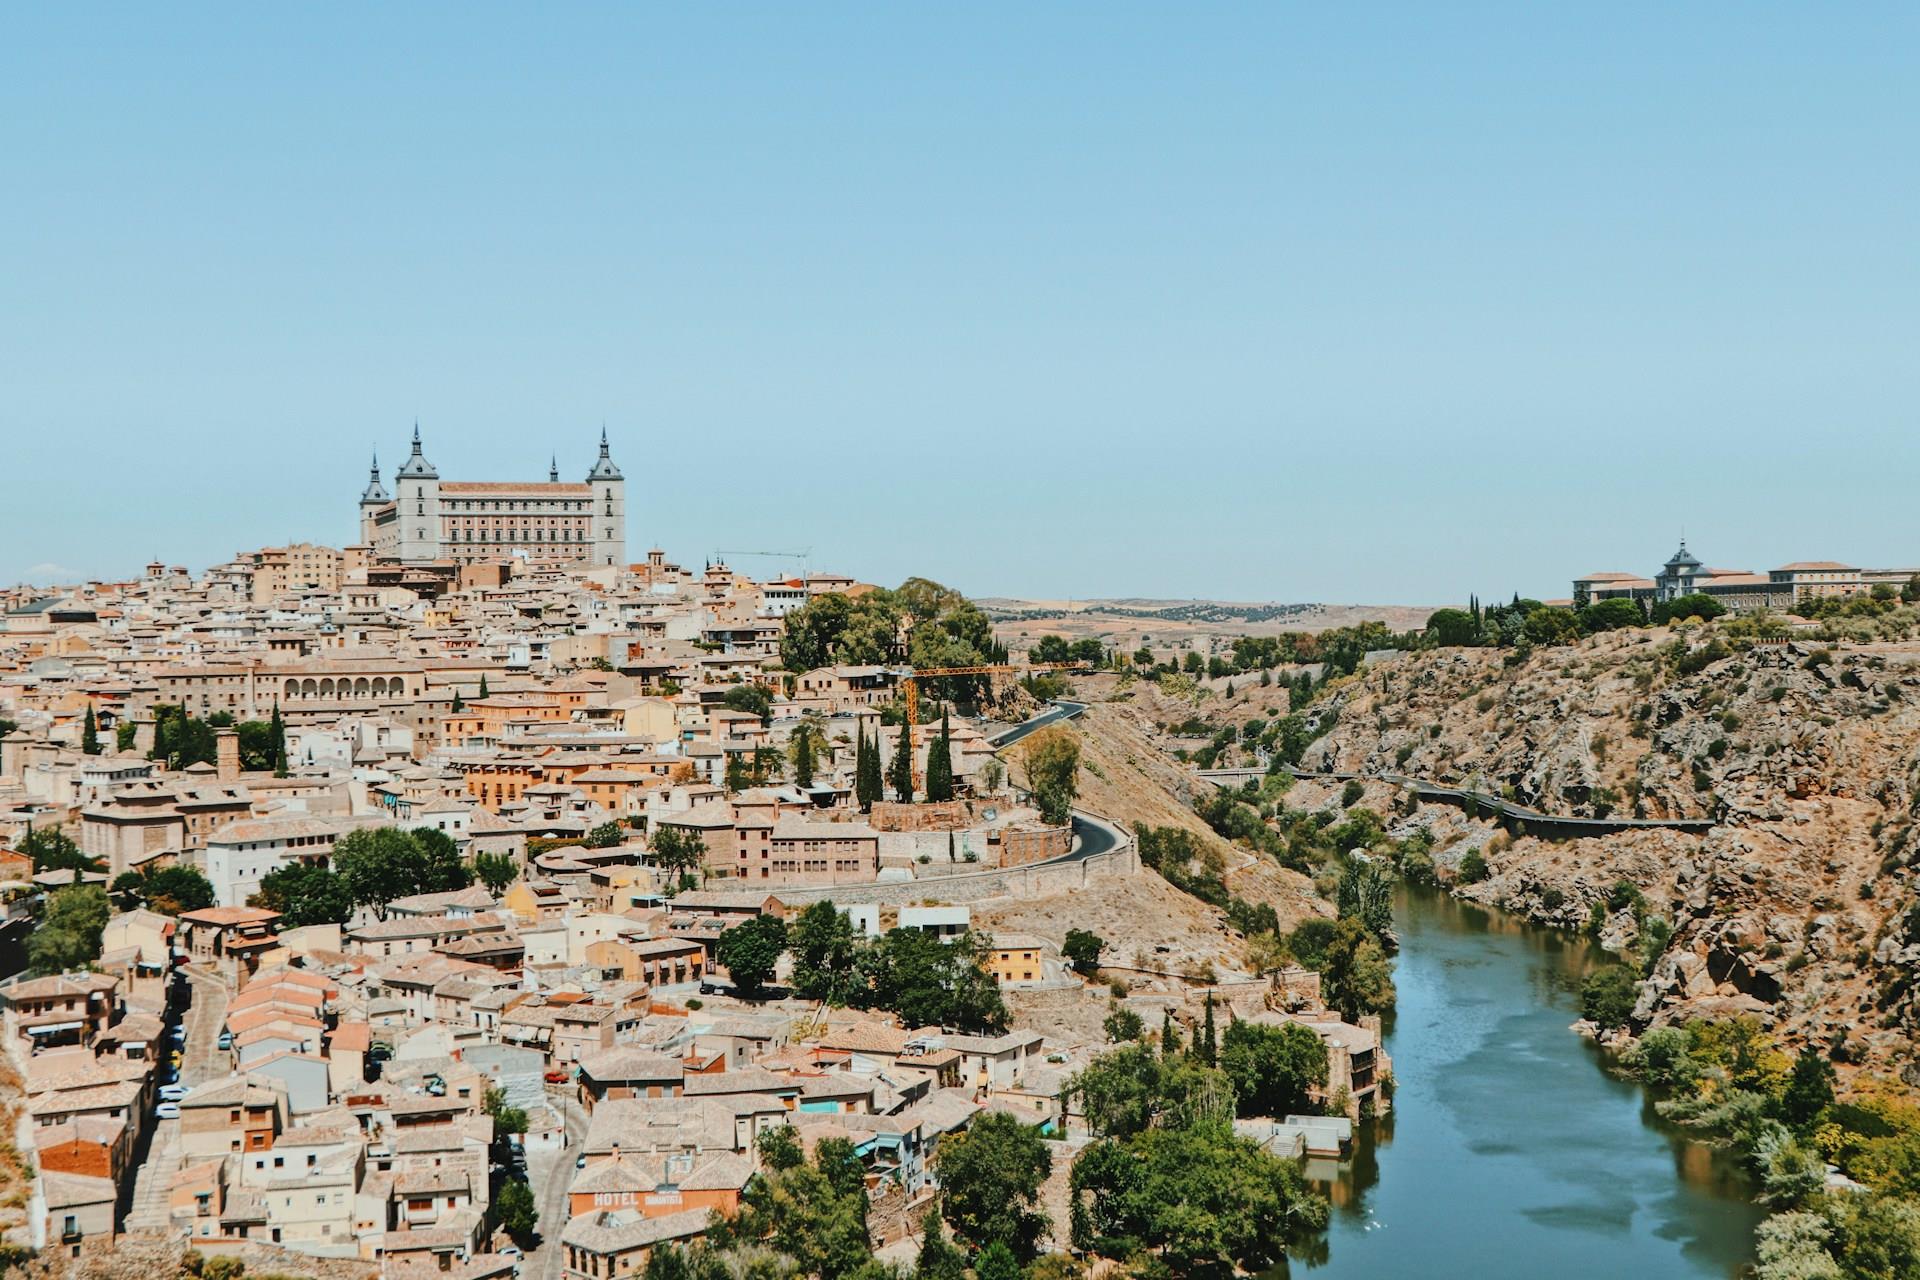 Excursion to Toledo with Cathedral and 7 monuments